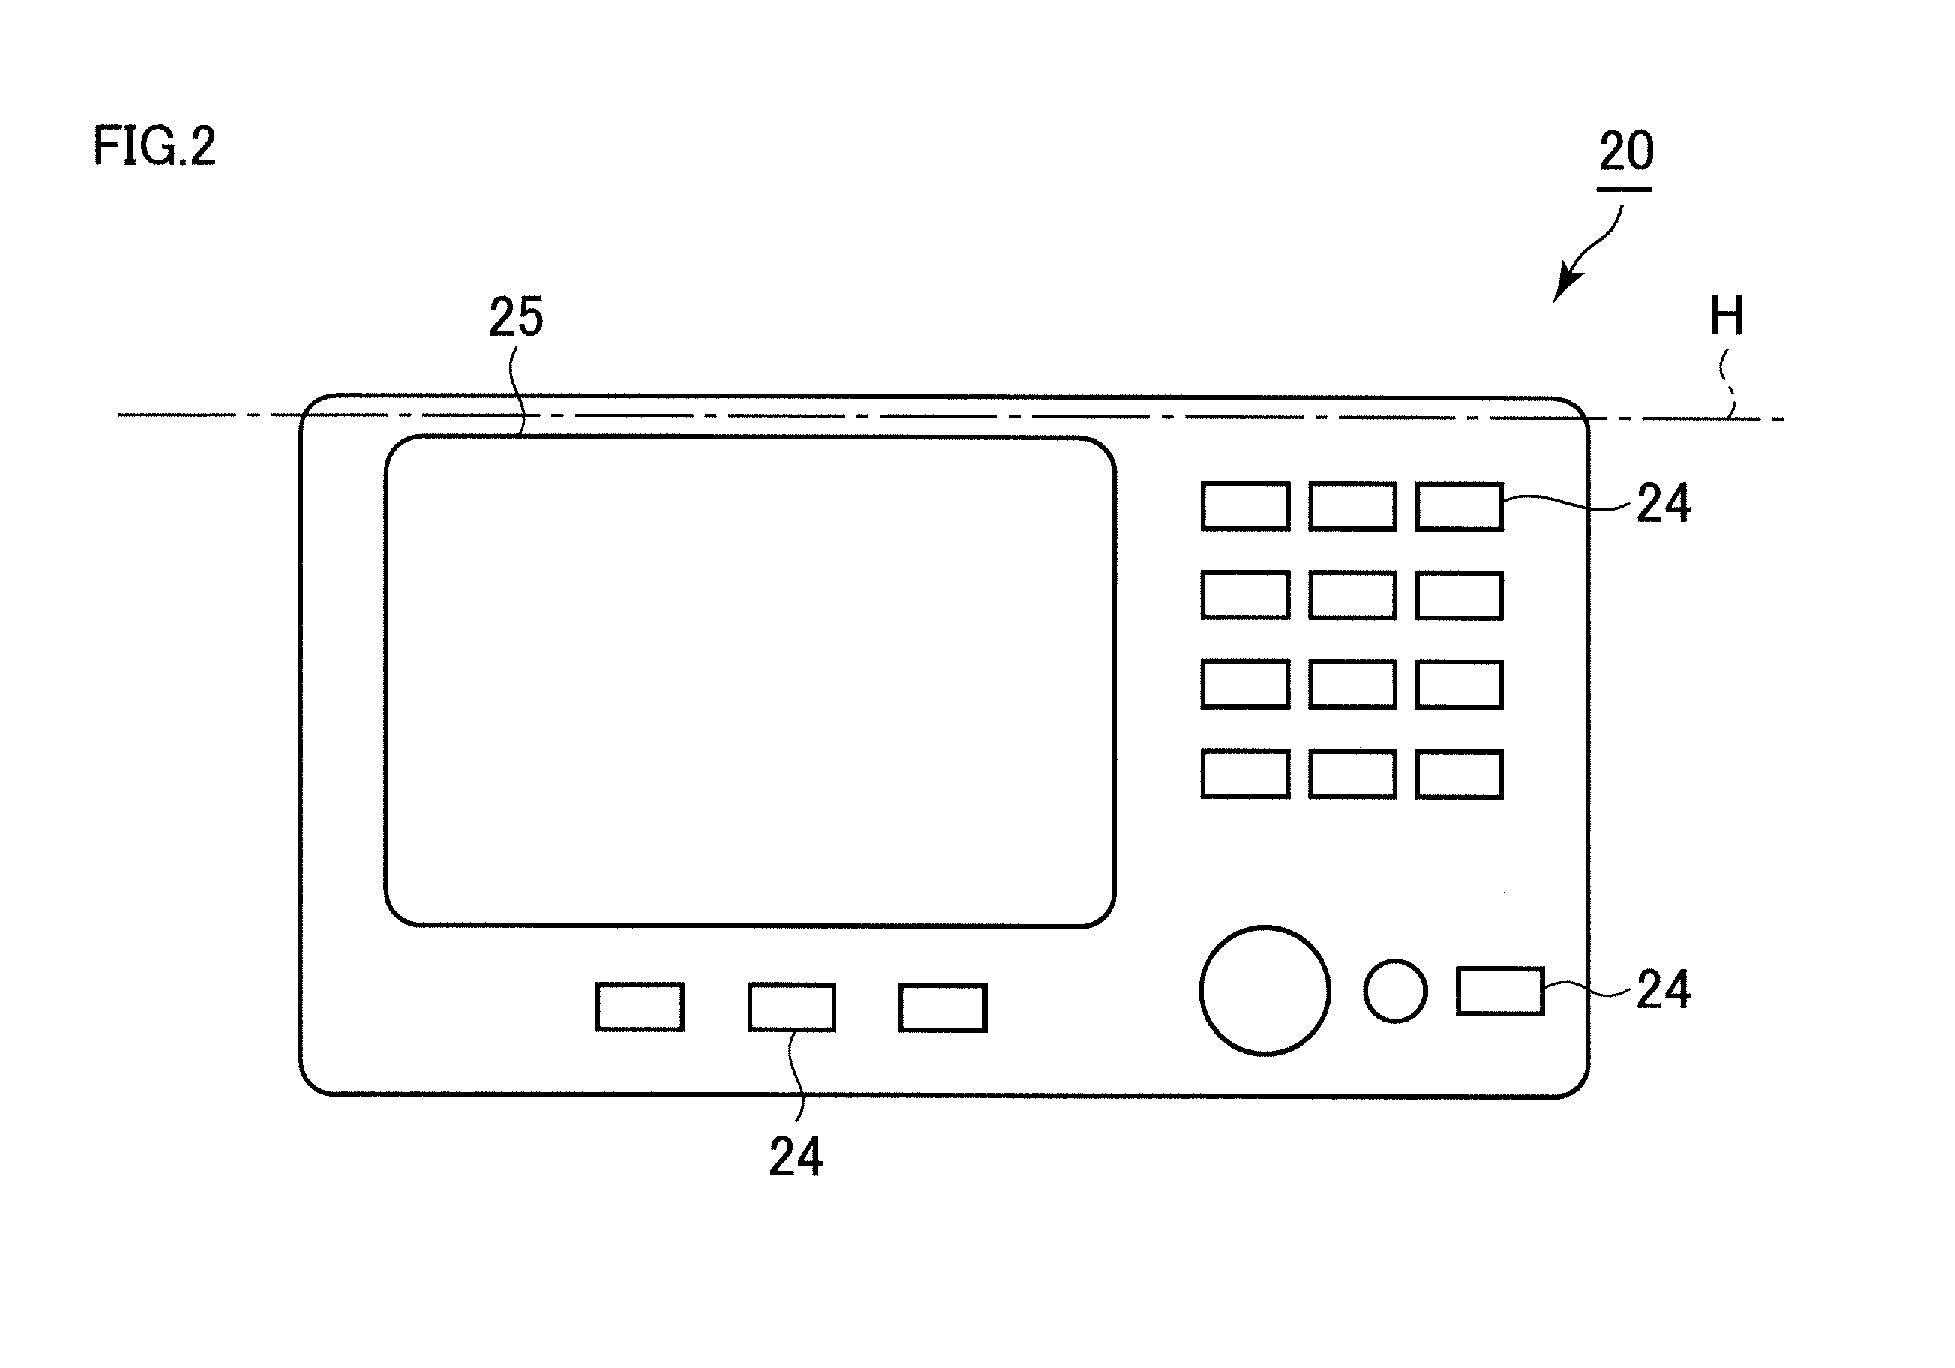 Image forming apparatus capable of changing operating state